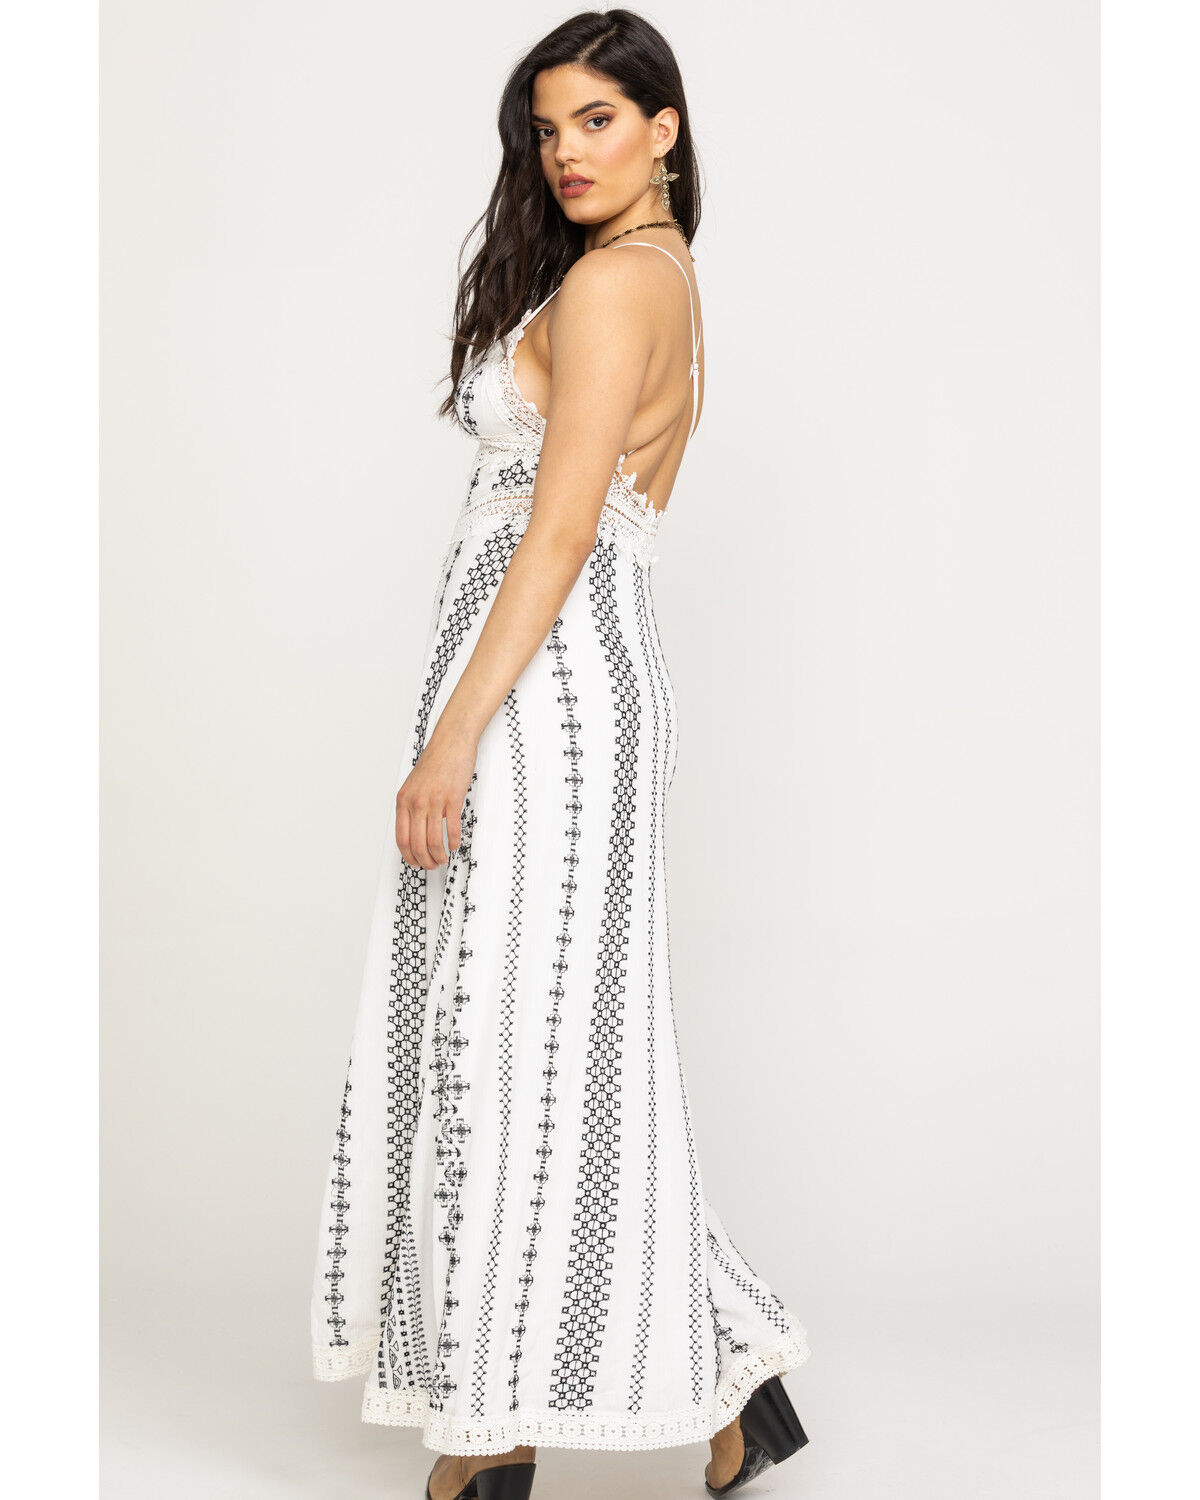 Red/White or Blue/White Dannii Matthews Beautiful Ladies Womens Aztec Print Cross Over V Neck Maxi Dress with Pleat Detail